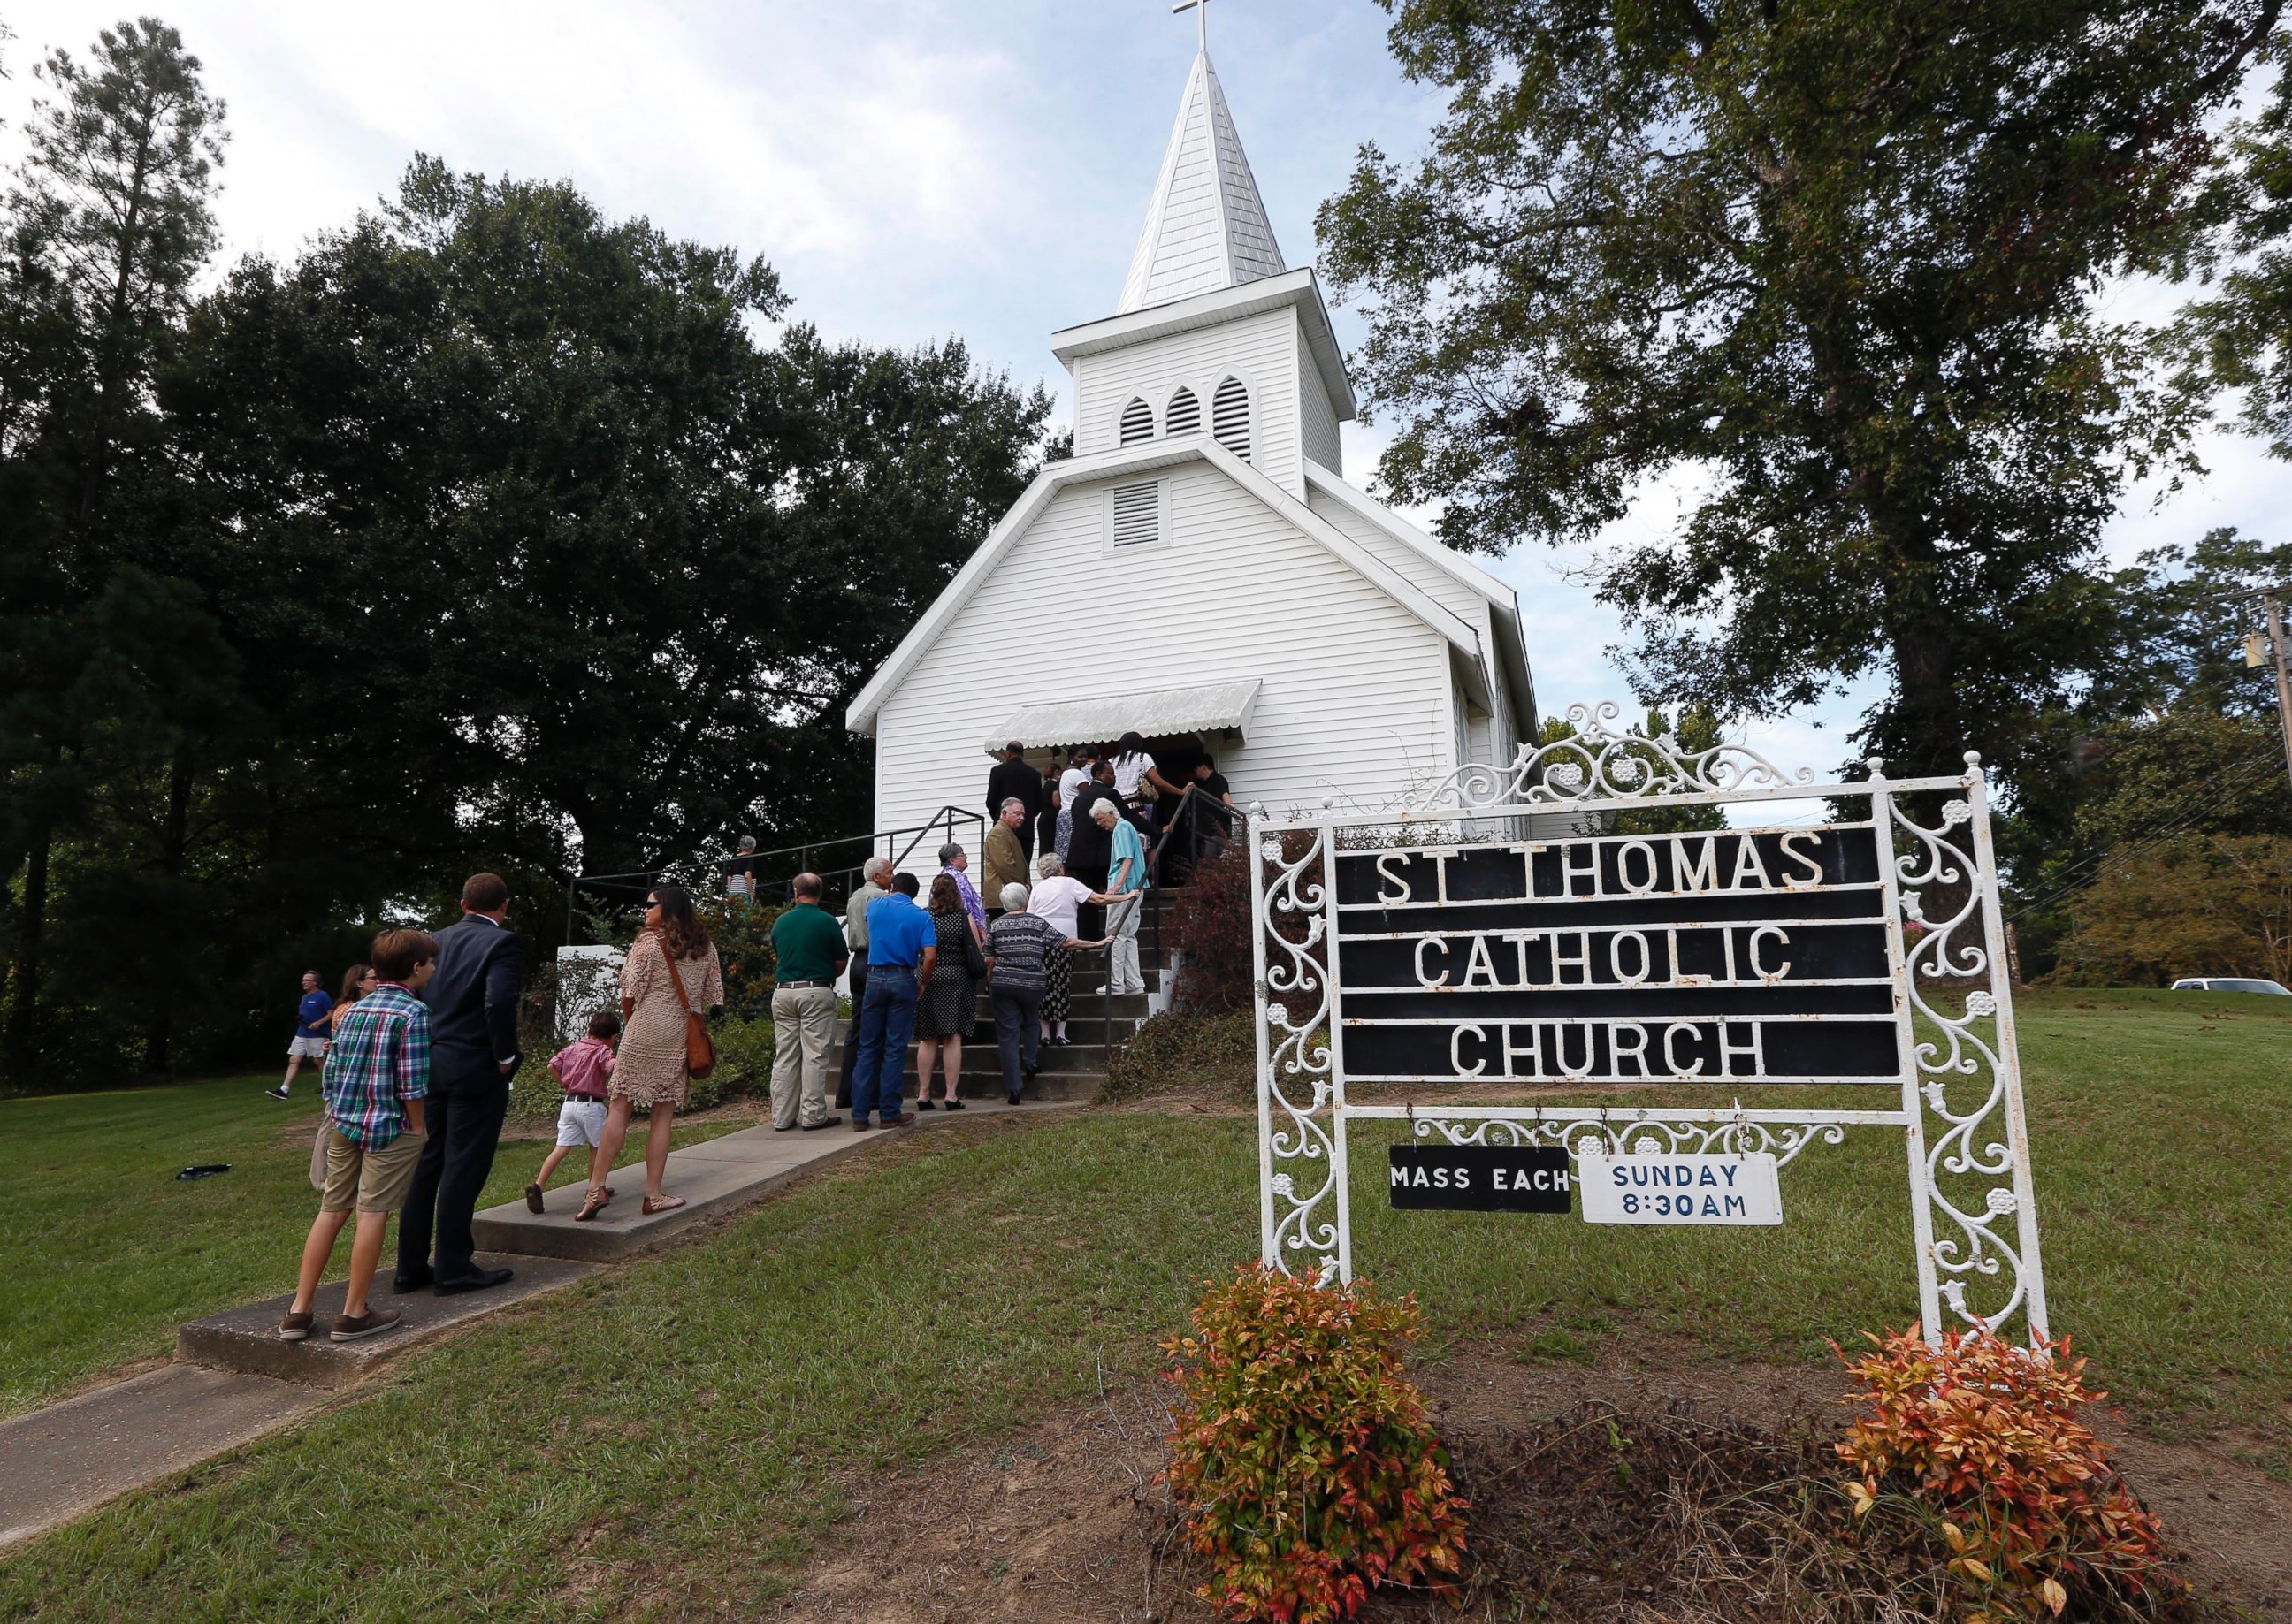 PHOTO: People stand in line to attend a vigil for the deceased held at St. Thomas Catholic Church in Lexington, Mississippi, for Sister Margaret Held and Sister Paula Merrill, Aug. 28, 2016.